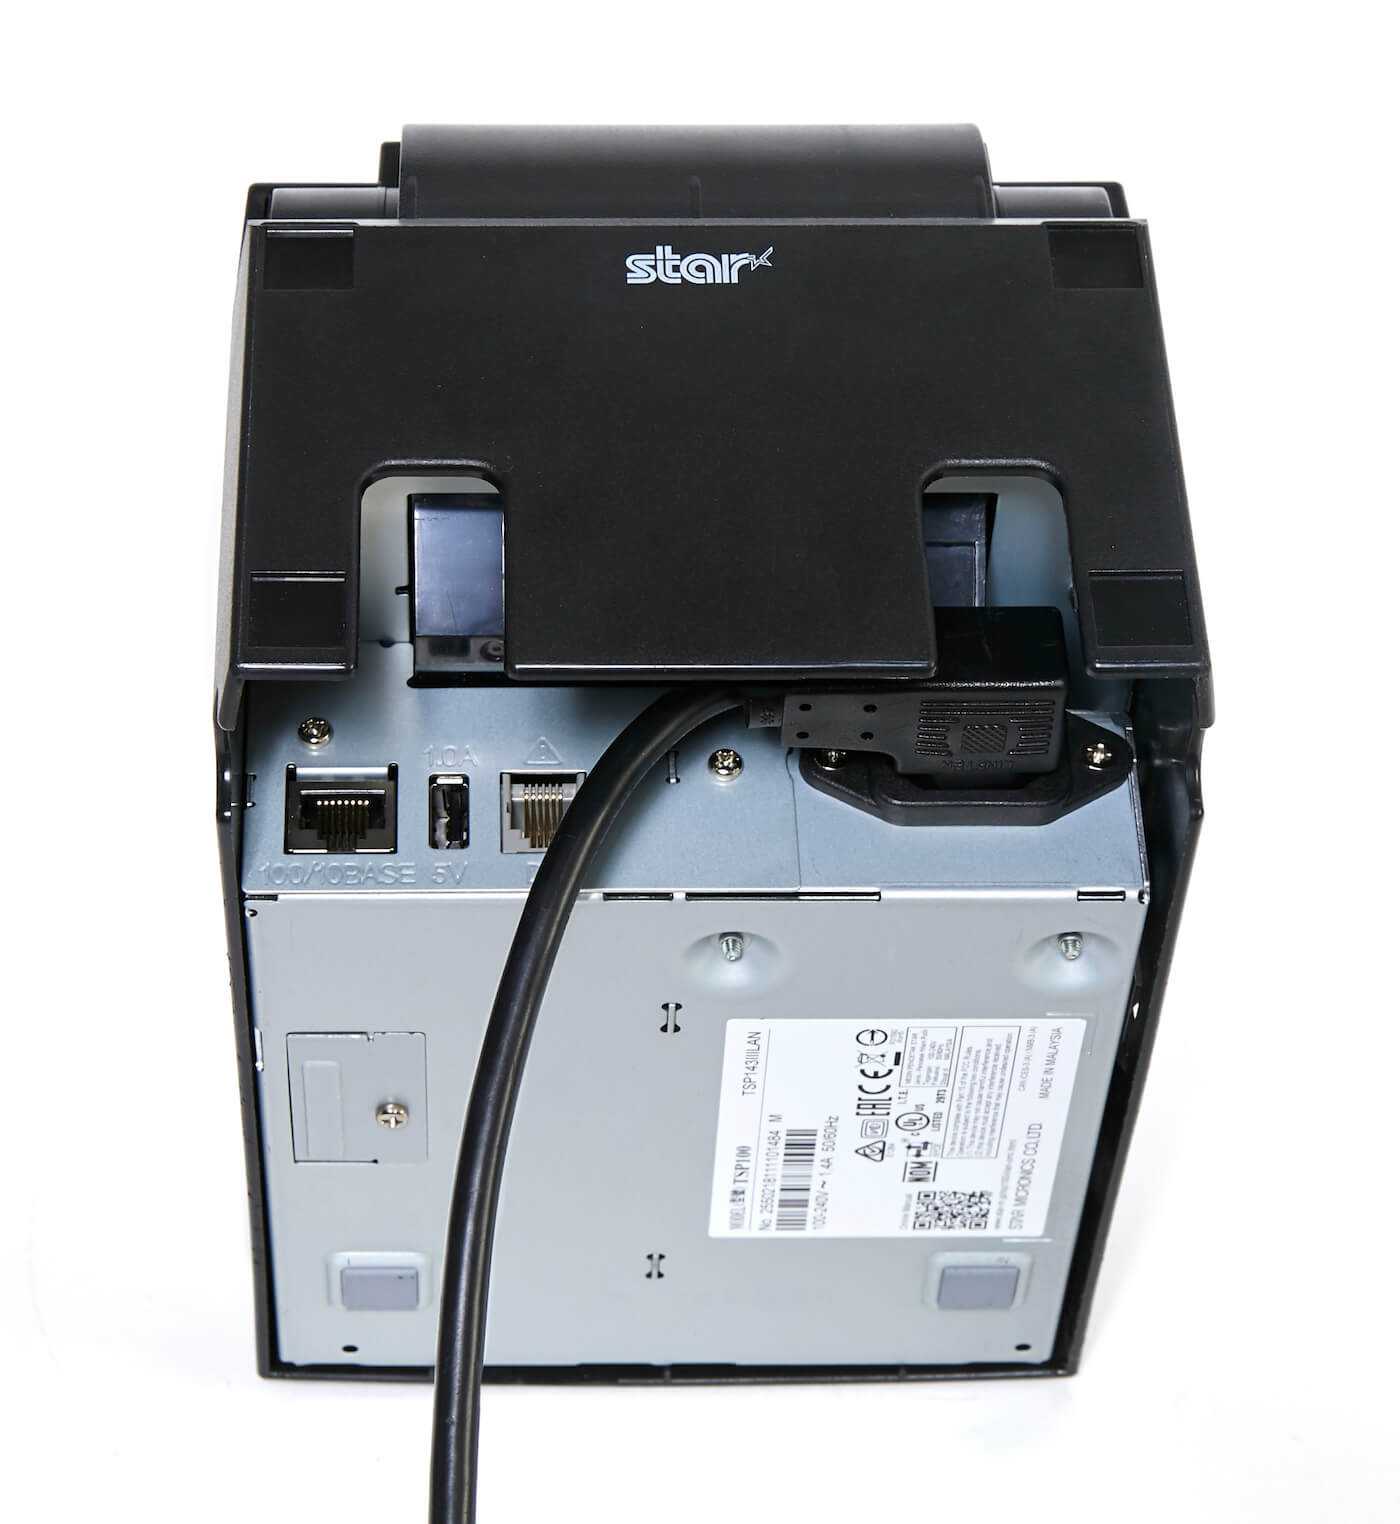 Retail-R-Star-receipt-printer-power-cable-only.jpg